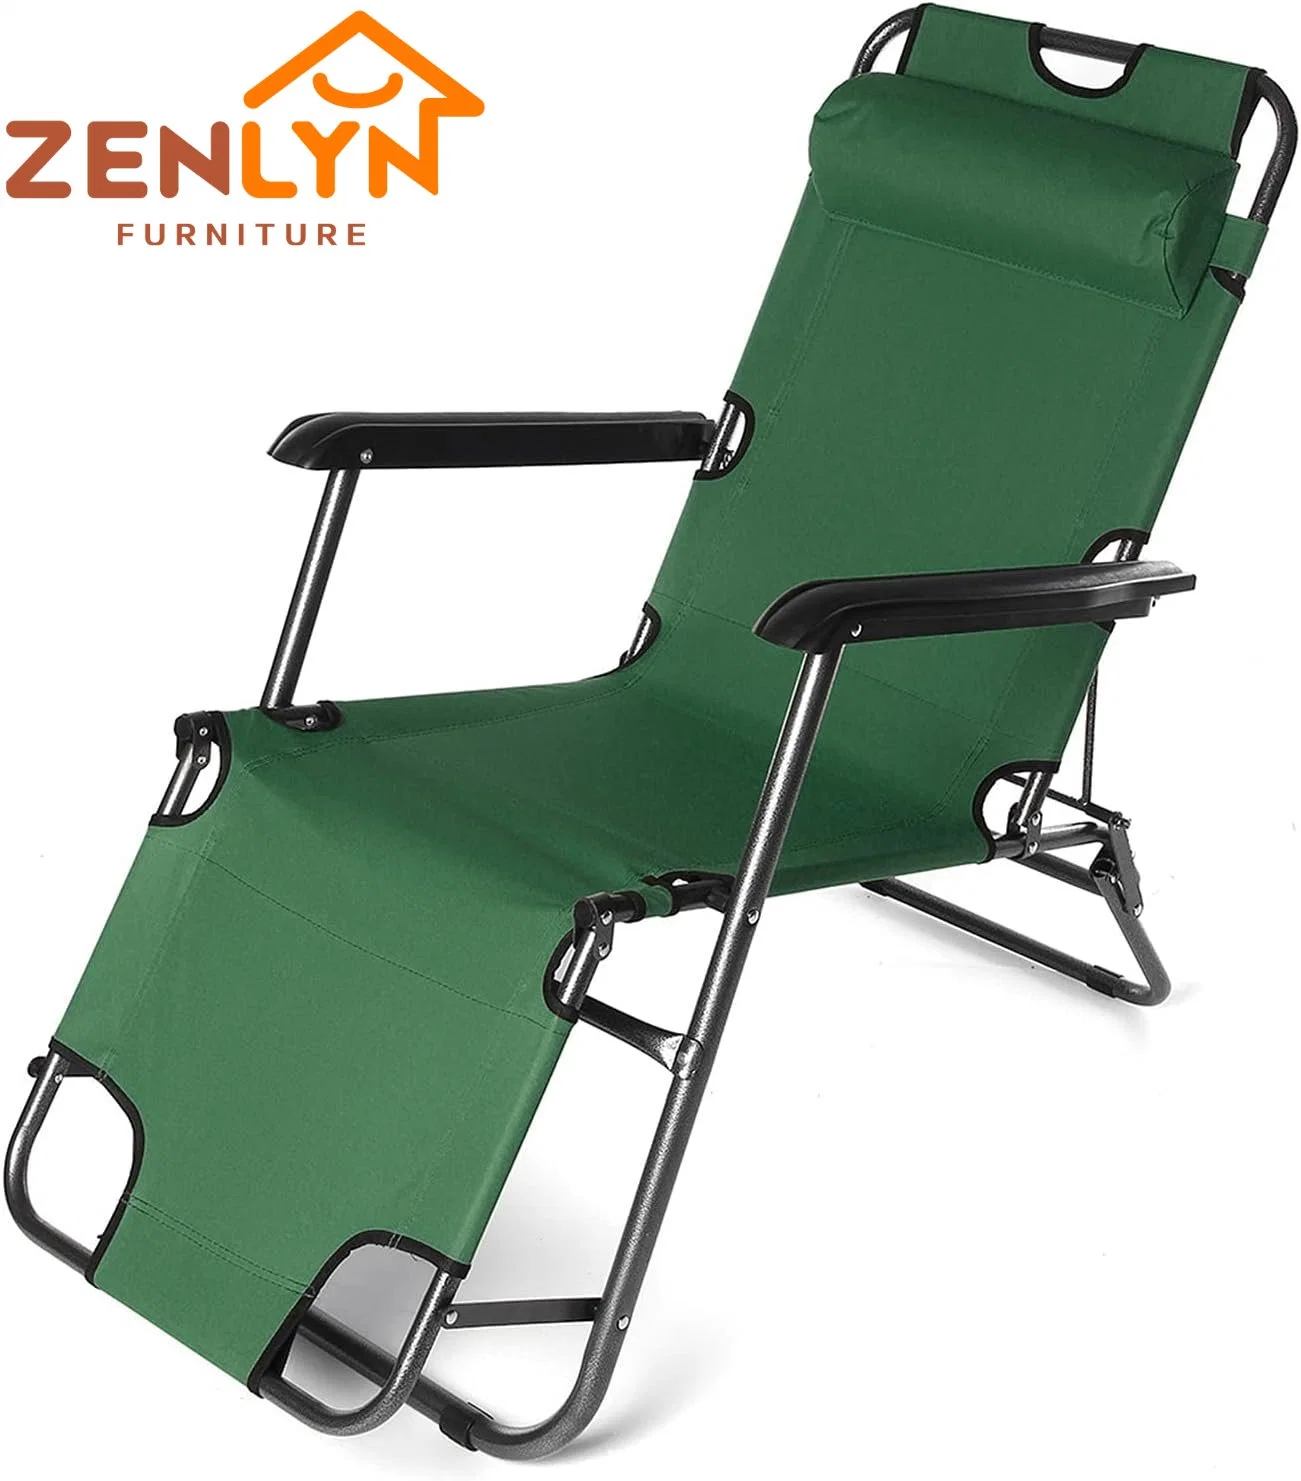 Oxford Fabric Leisure Adjustable Tanning Outdoor Folding Camping Patio Lounge Chair Beach Reclining Chair Green Color